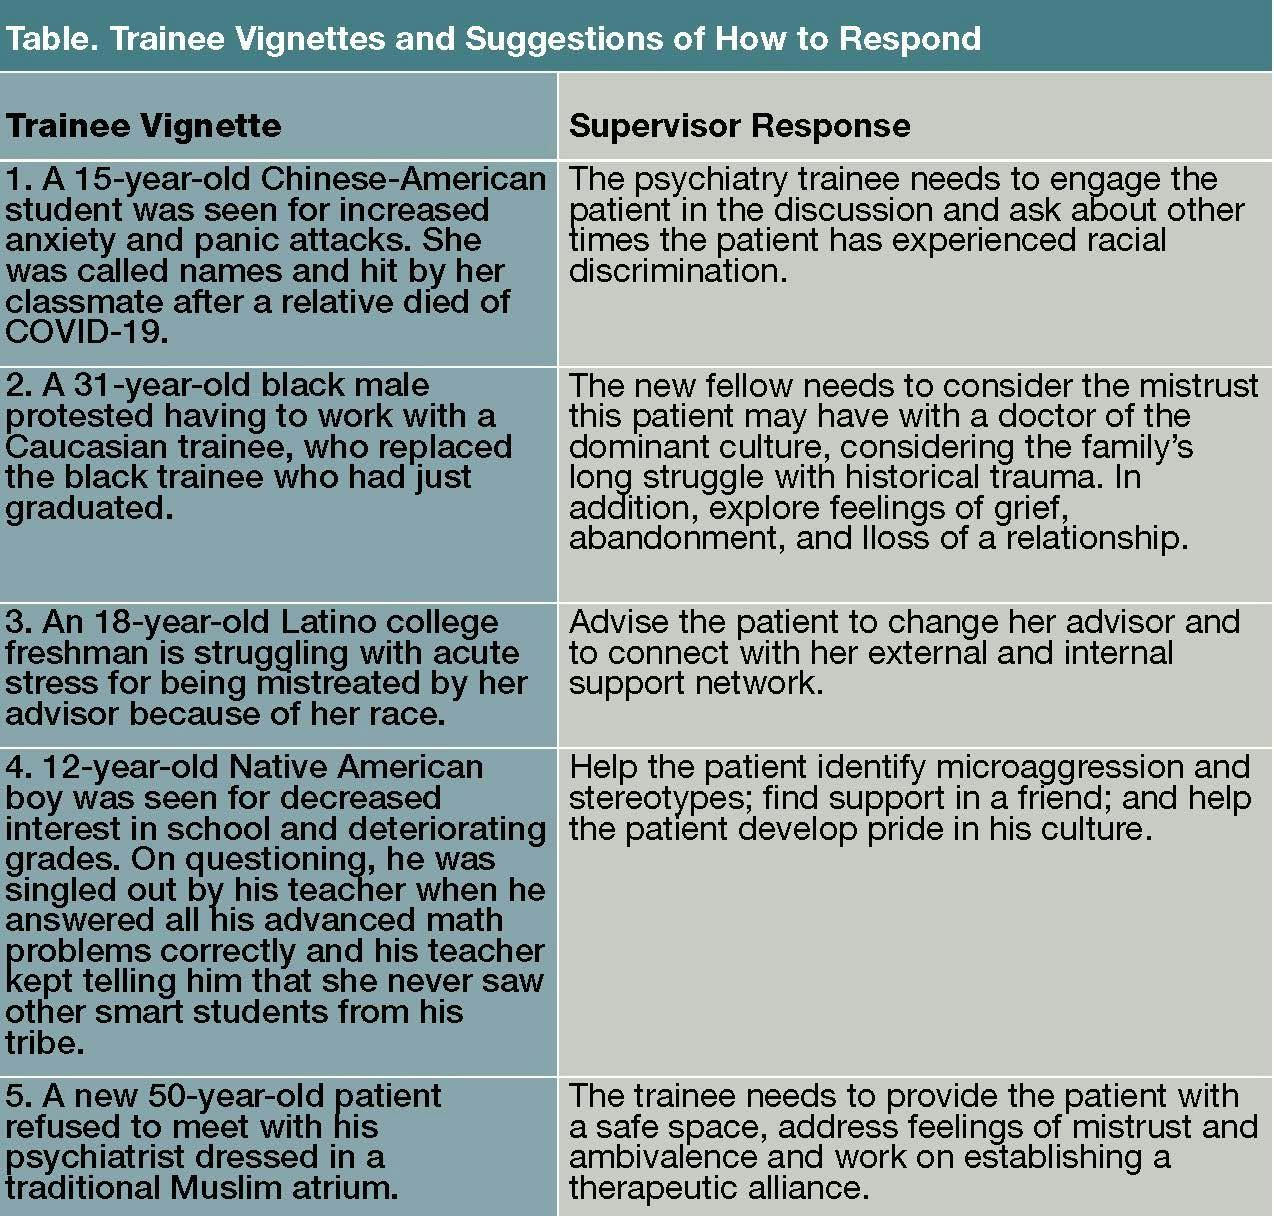 Table. Trainee Vignettes and Suggestions of How to Respond